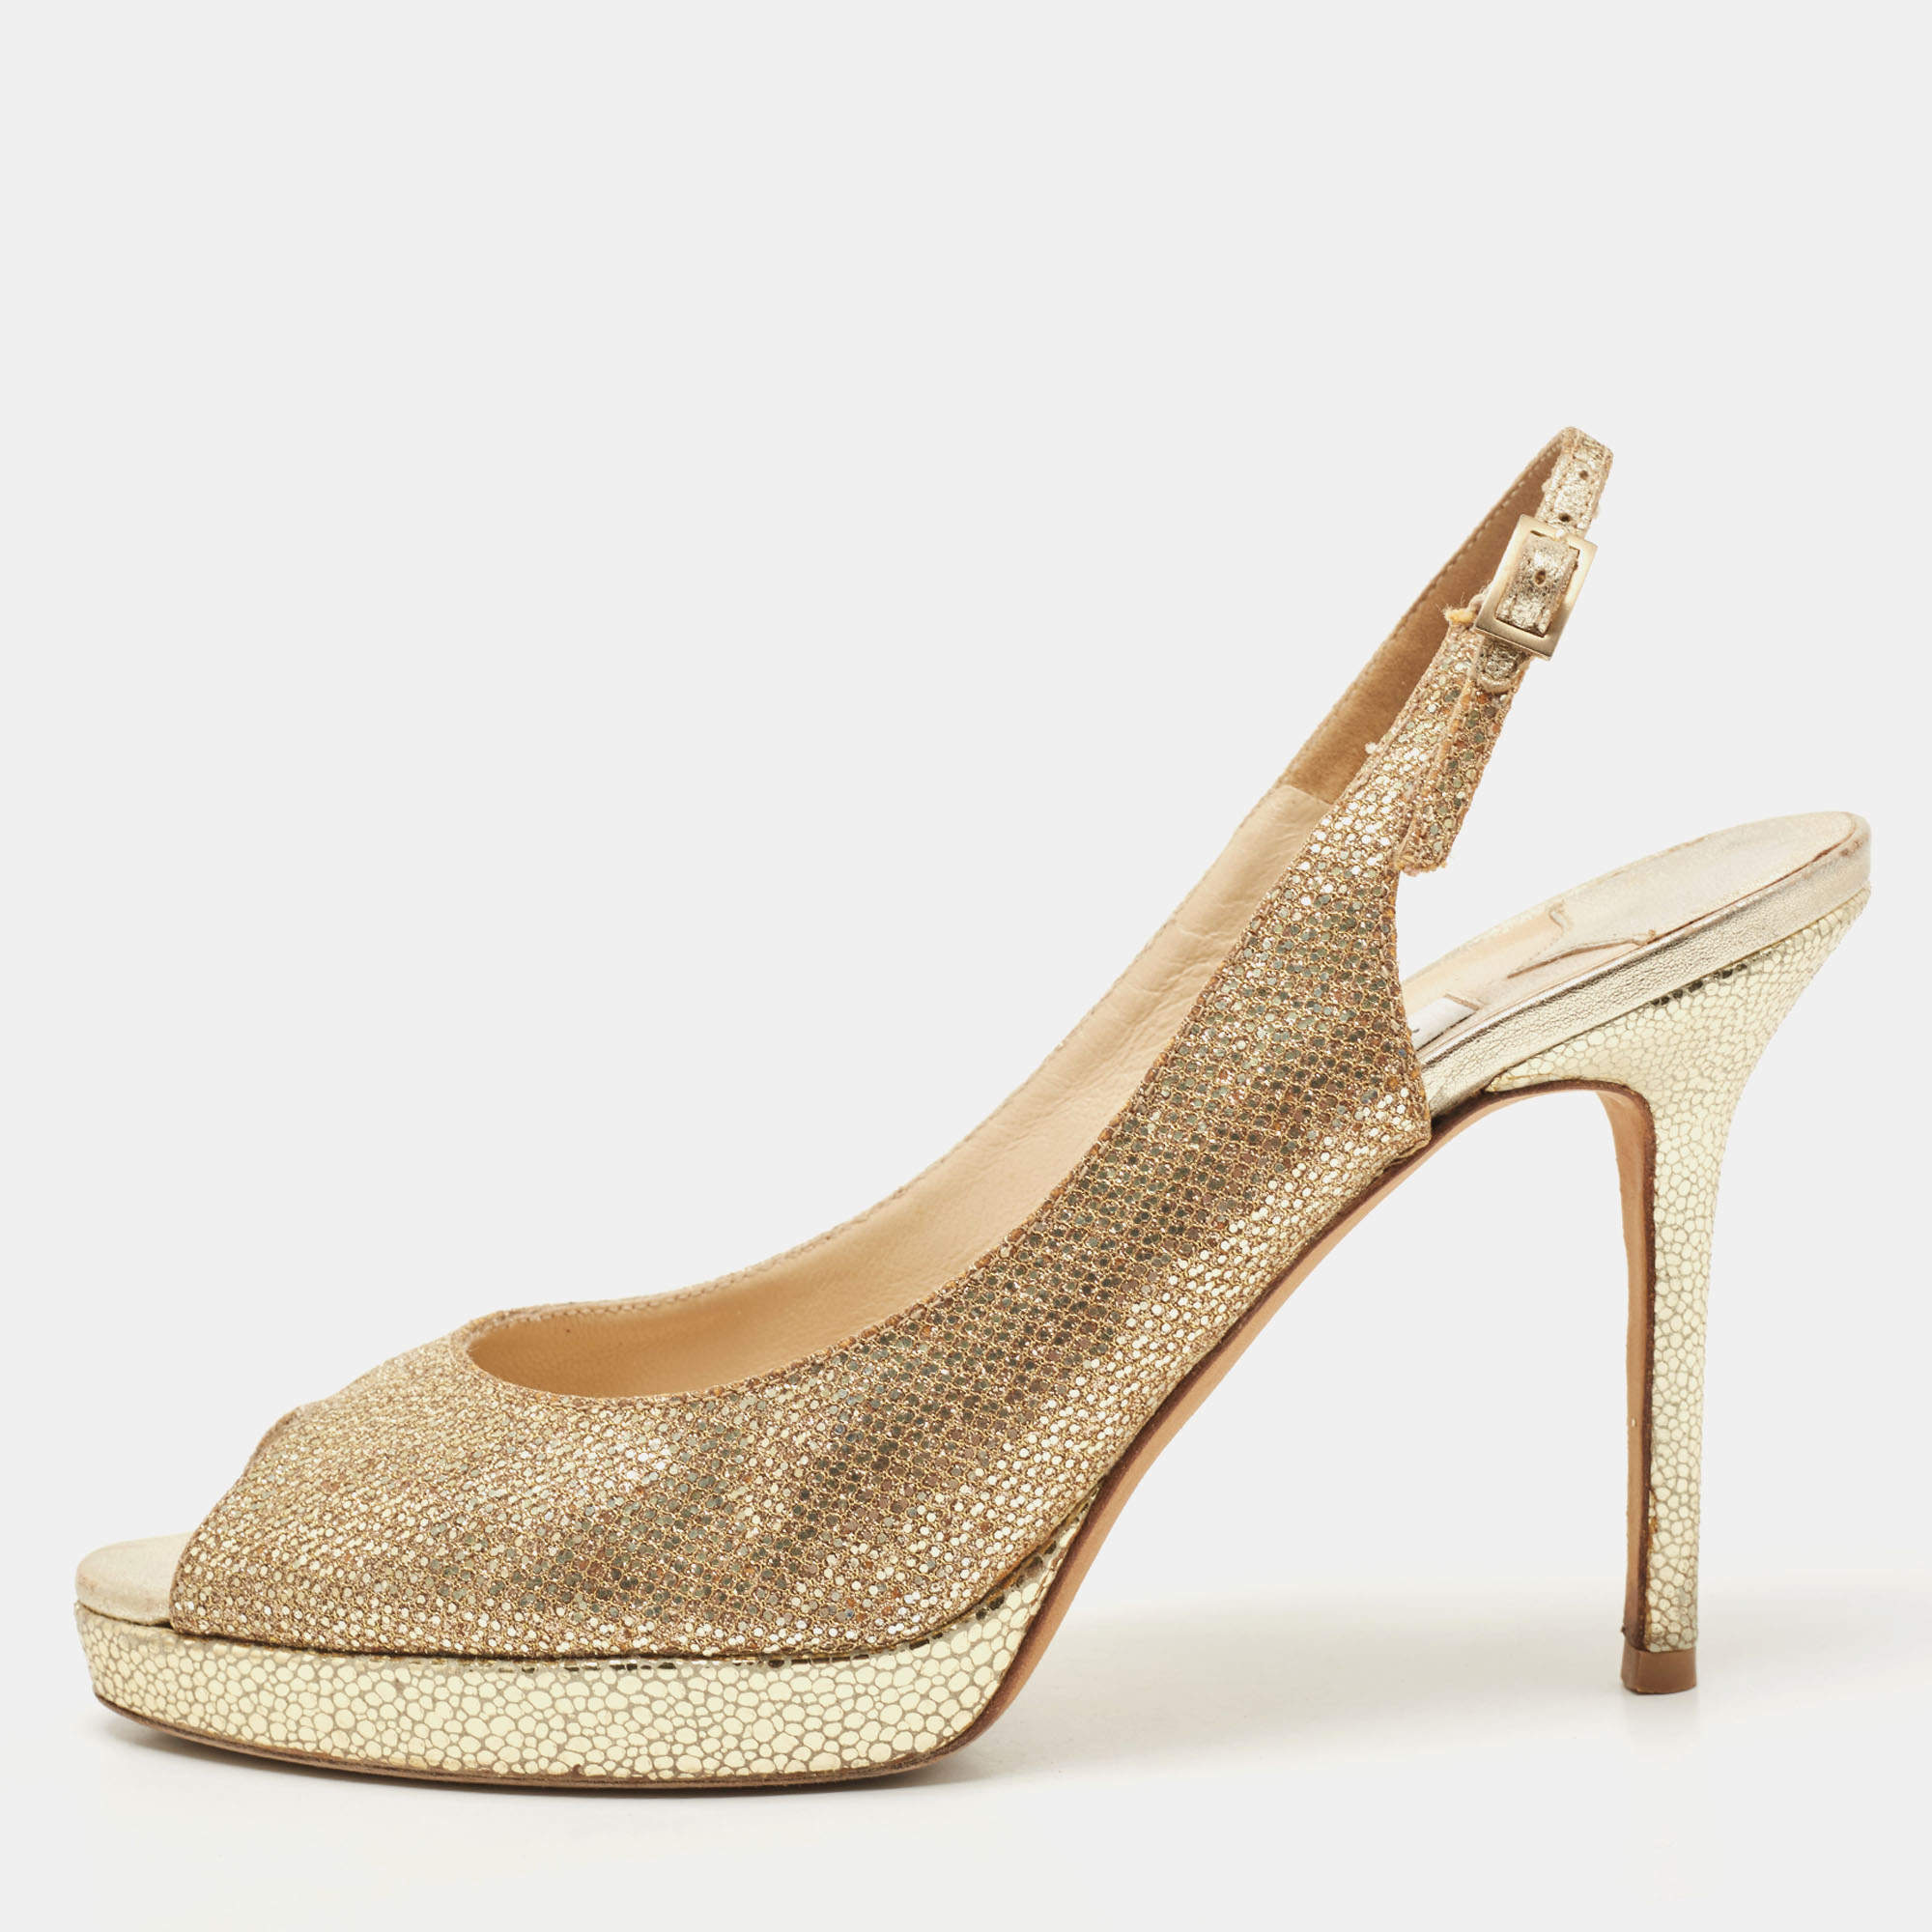 Pre-owned Jimmy Choo Metallic Gold Coarse Glitter And Leather Slingback Pumps Size 38